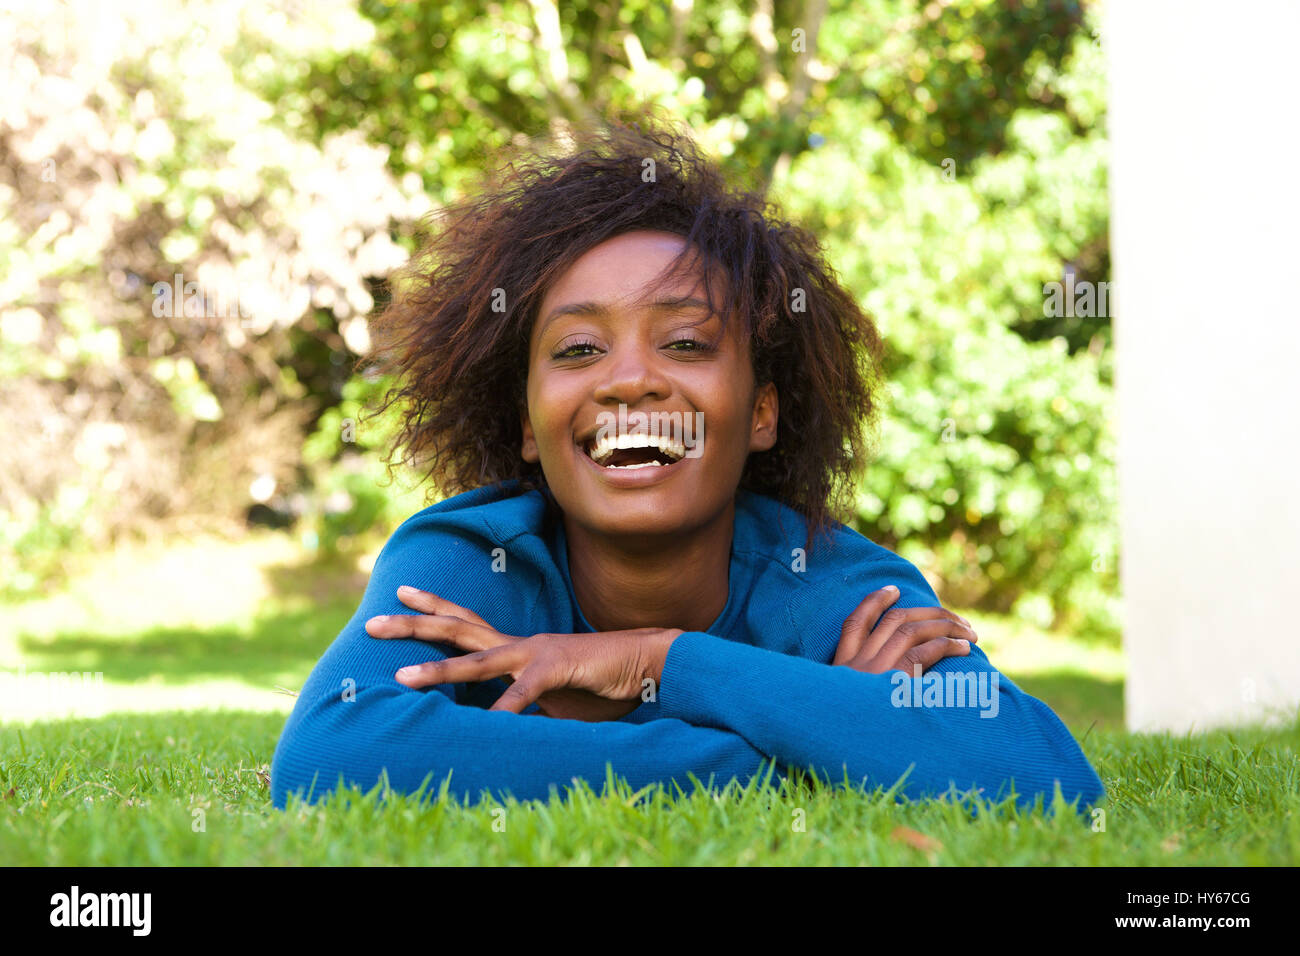 Portrait of an attractive young black woman lying on grass laughing Stock Photo